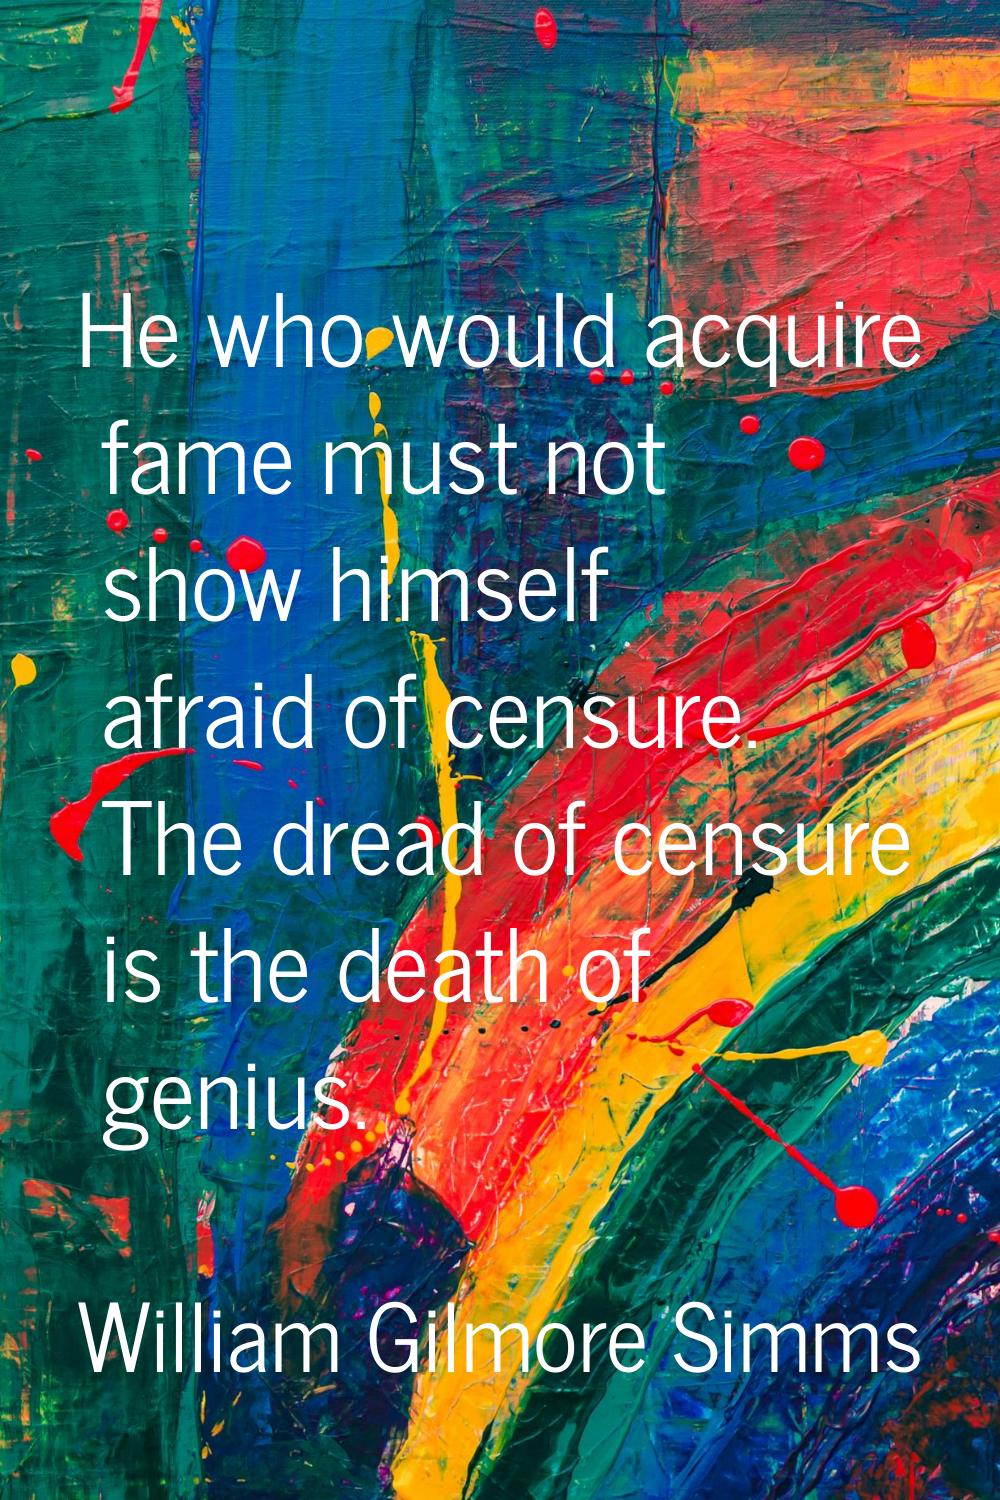 He who would acquire fame must not show himself afraid of censure. The dread of censure is the deat